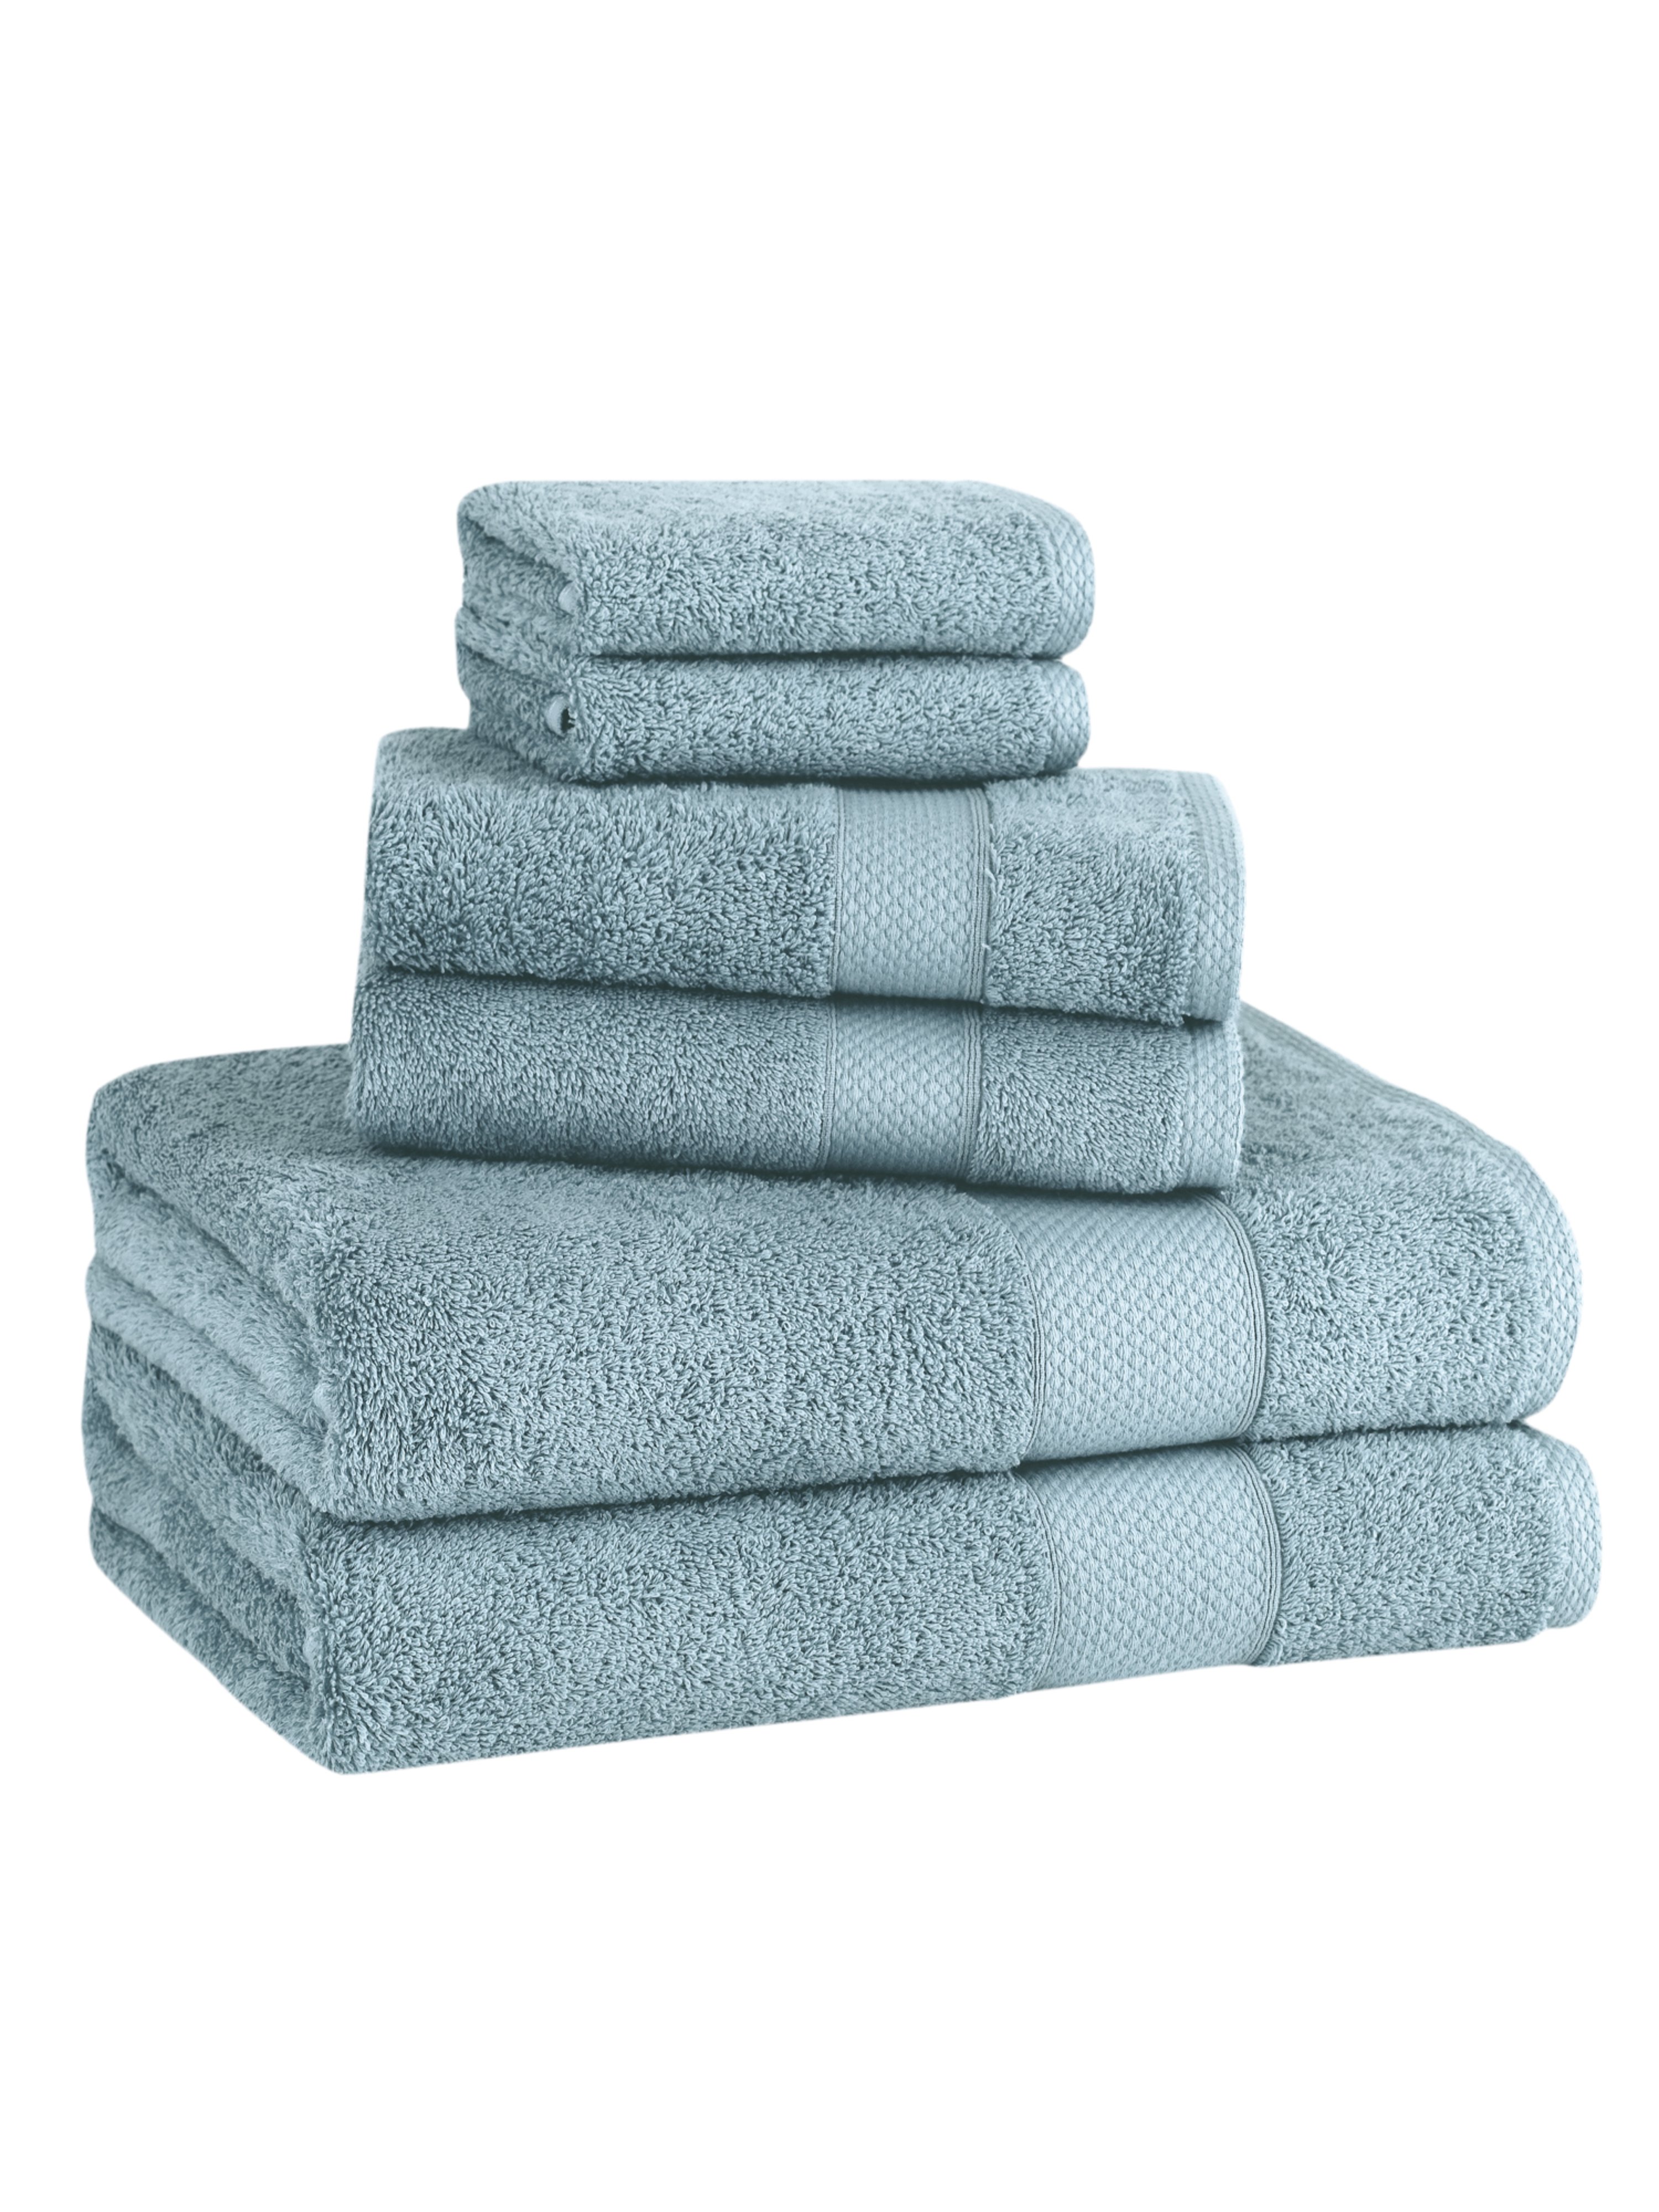 CLASSIC TURKISH TOWELS CLASSIC TURKISH TOWELS MADISON TOWEL COLLECTION